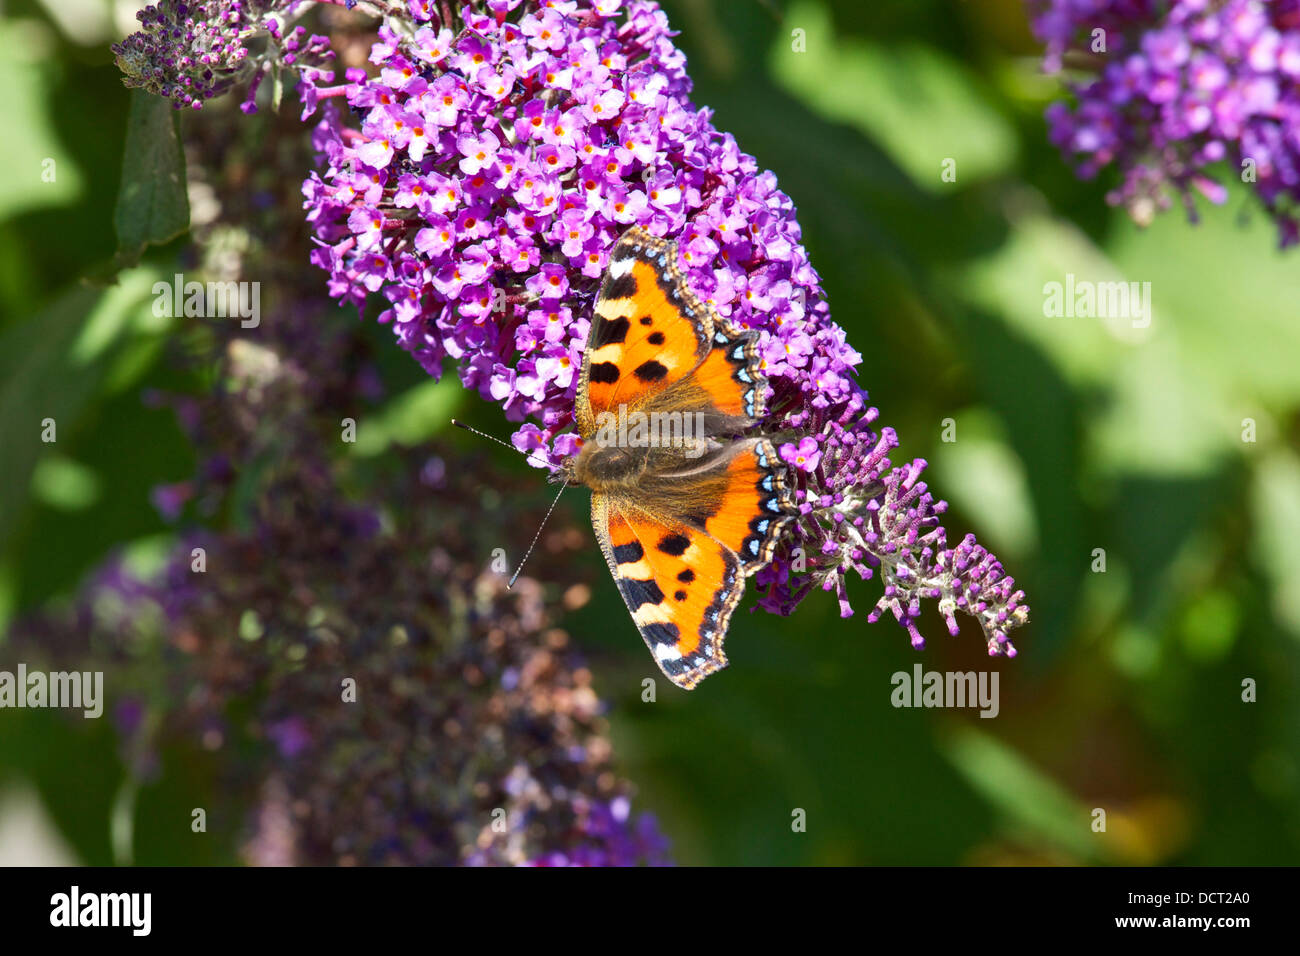 Faversham Kent UK - 21 August 2013 : The continuing good weather in the south east proves a blessing for the butterflies. The Small Tortoiseshell (Aglais urticae) has been on the decline in the UK in recent years. One is seen here on a Buddleia. Stock Photo